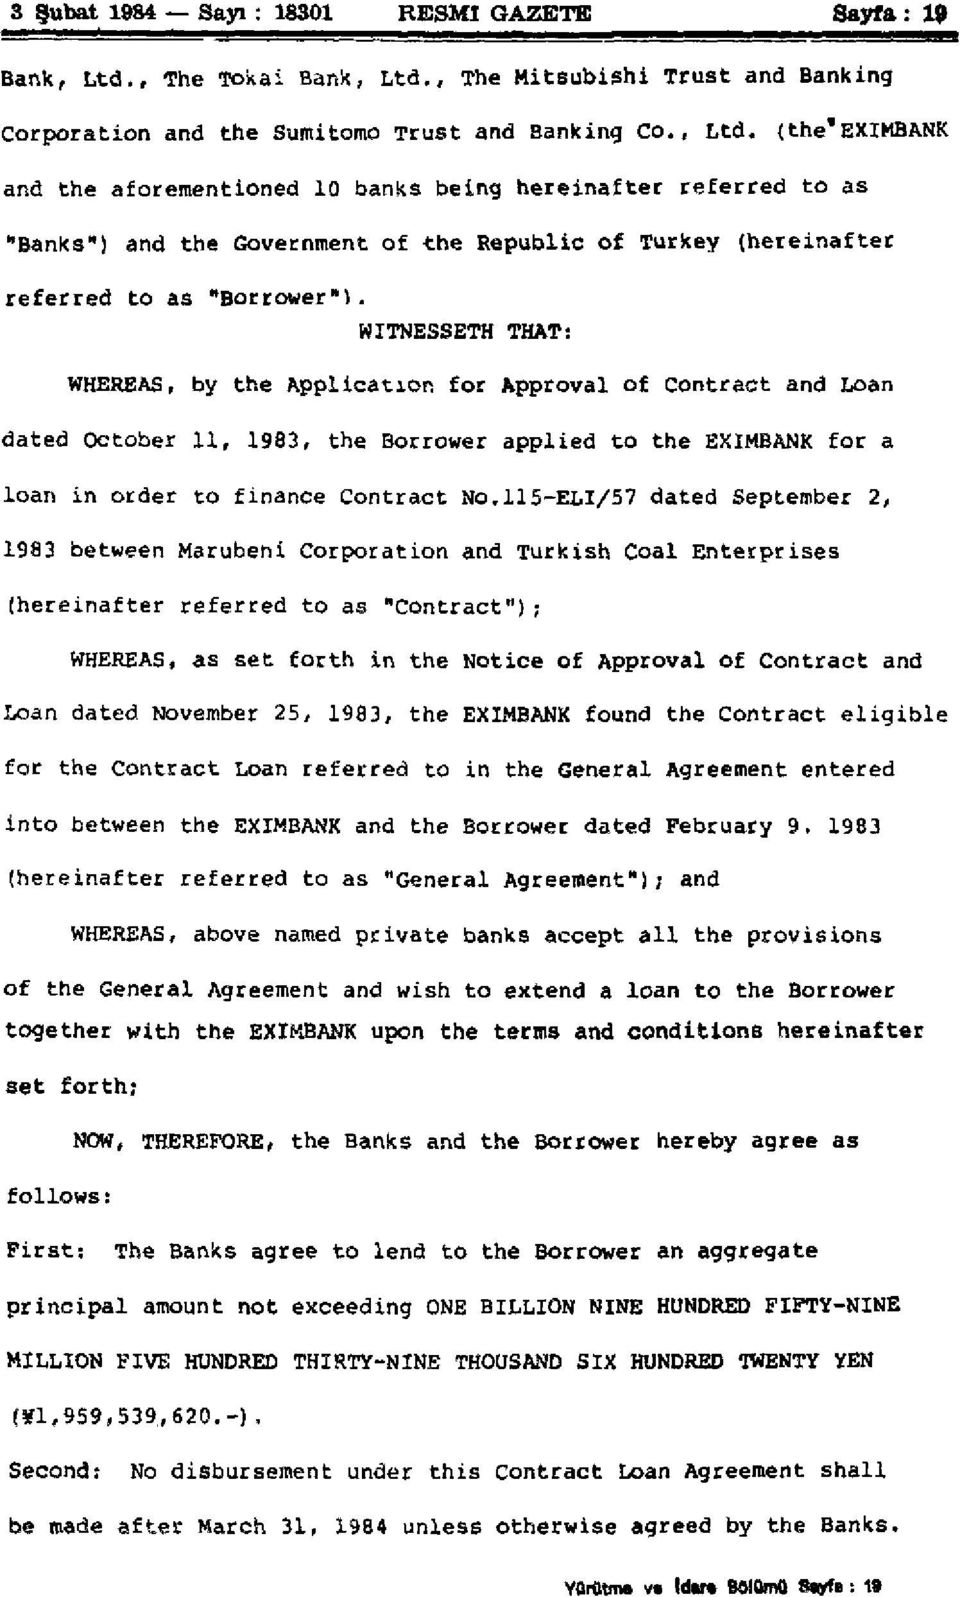 WITNESSETH THAT: WHEREAS, by the Application for Approval of Contract and Loan dated October 11, 1983, the Borrower applied to the EXIMBANK for a loan in order to finance Contract N0.